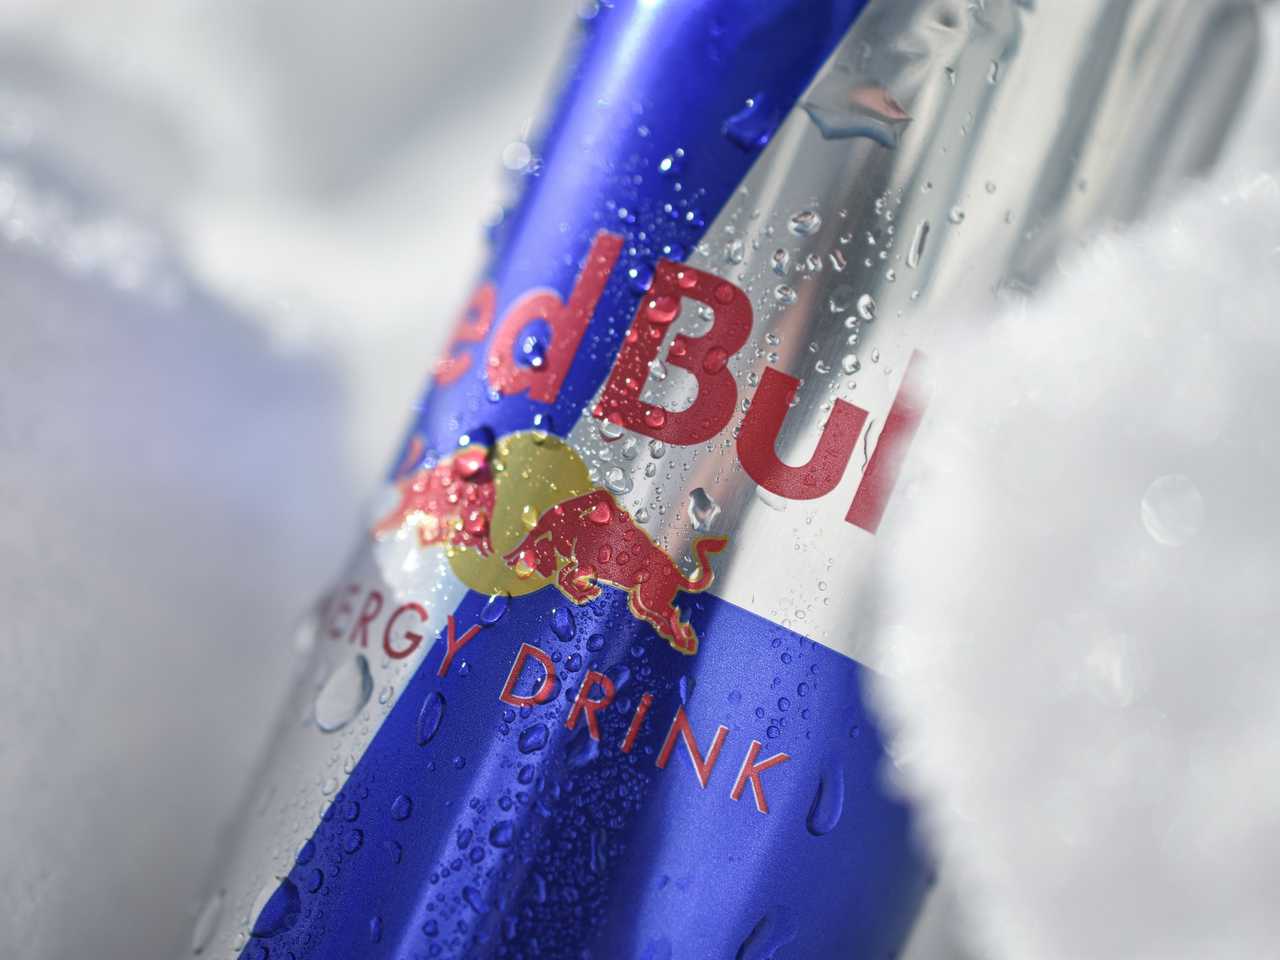 Cold can of Red Bull energy drink resting on crushed ice